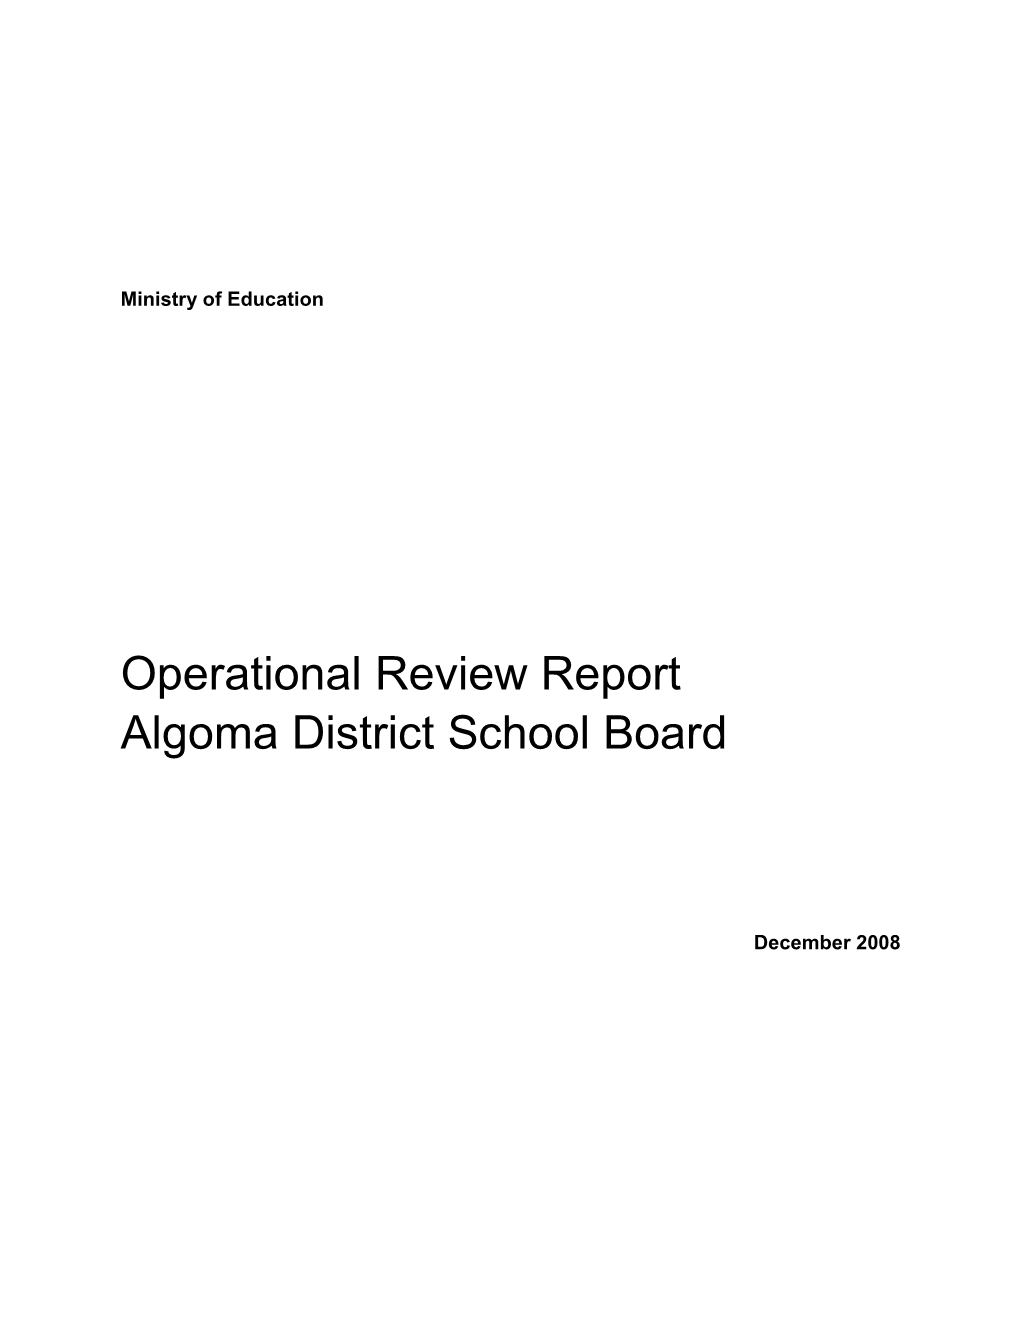 Operational Review Report Algoma District School Board